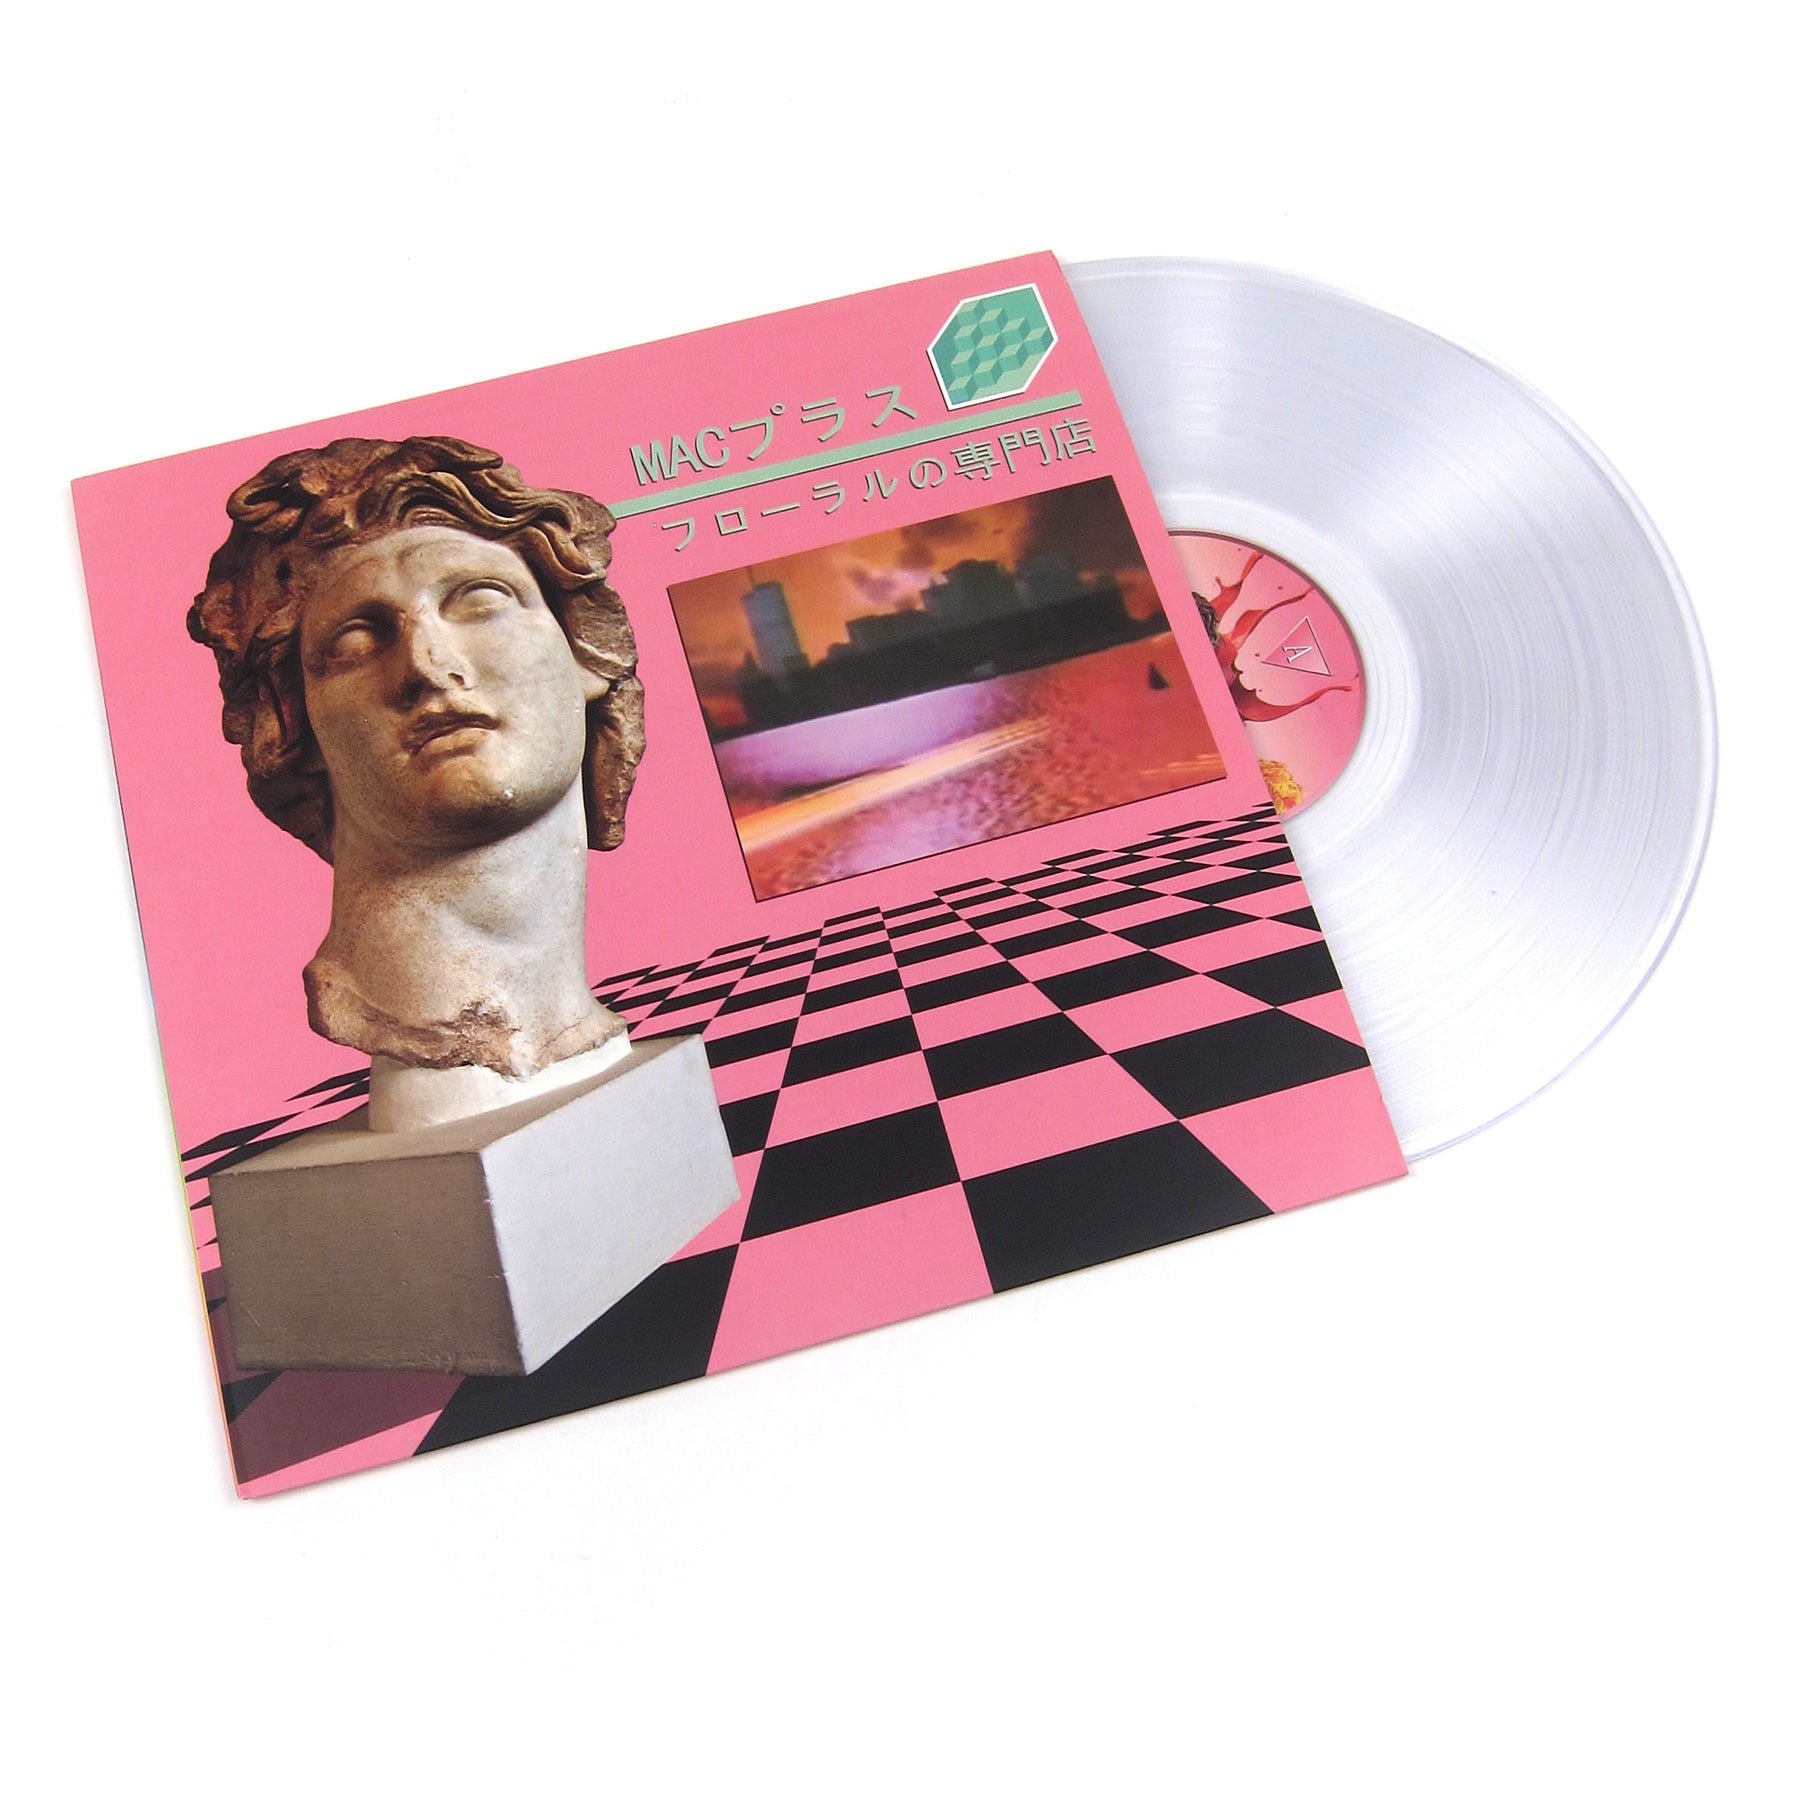 Floral Shoppe (Clear Colored Vinyl) Vinyl LPContact support for recommendations or customization questions            We answer requests Mon-Fri 10am-6pm EST                                                                            Name                                                          Email                                                        Message                                      Submit Question